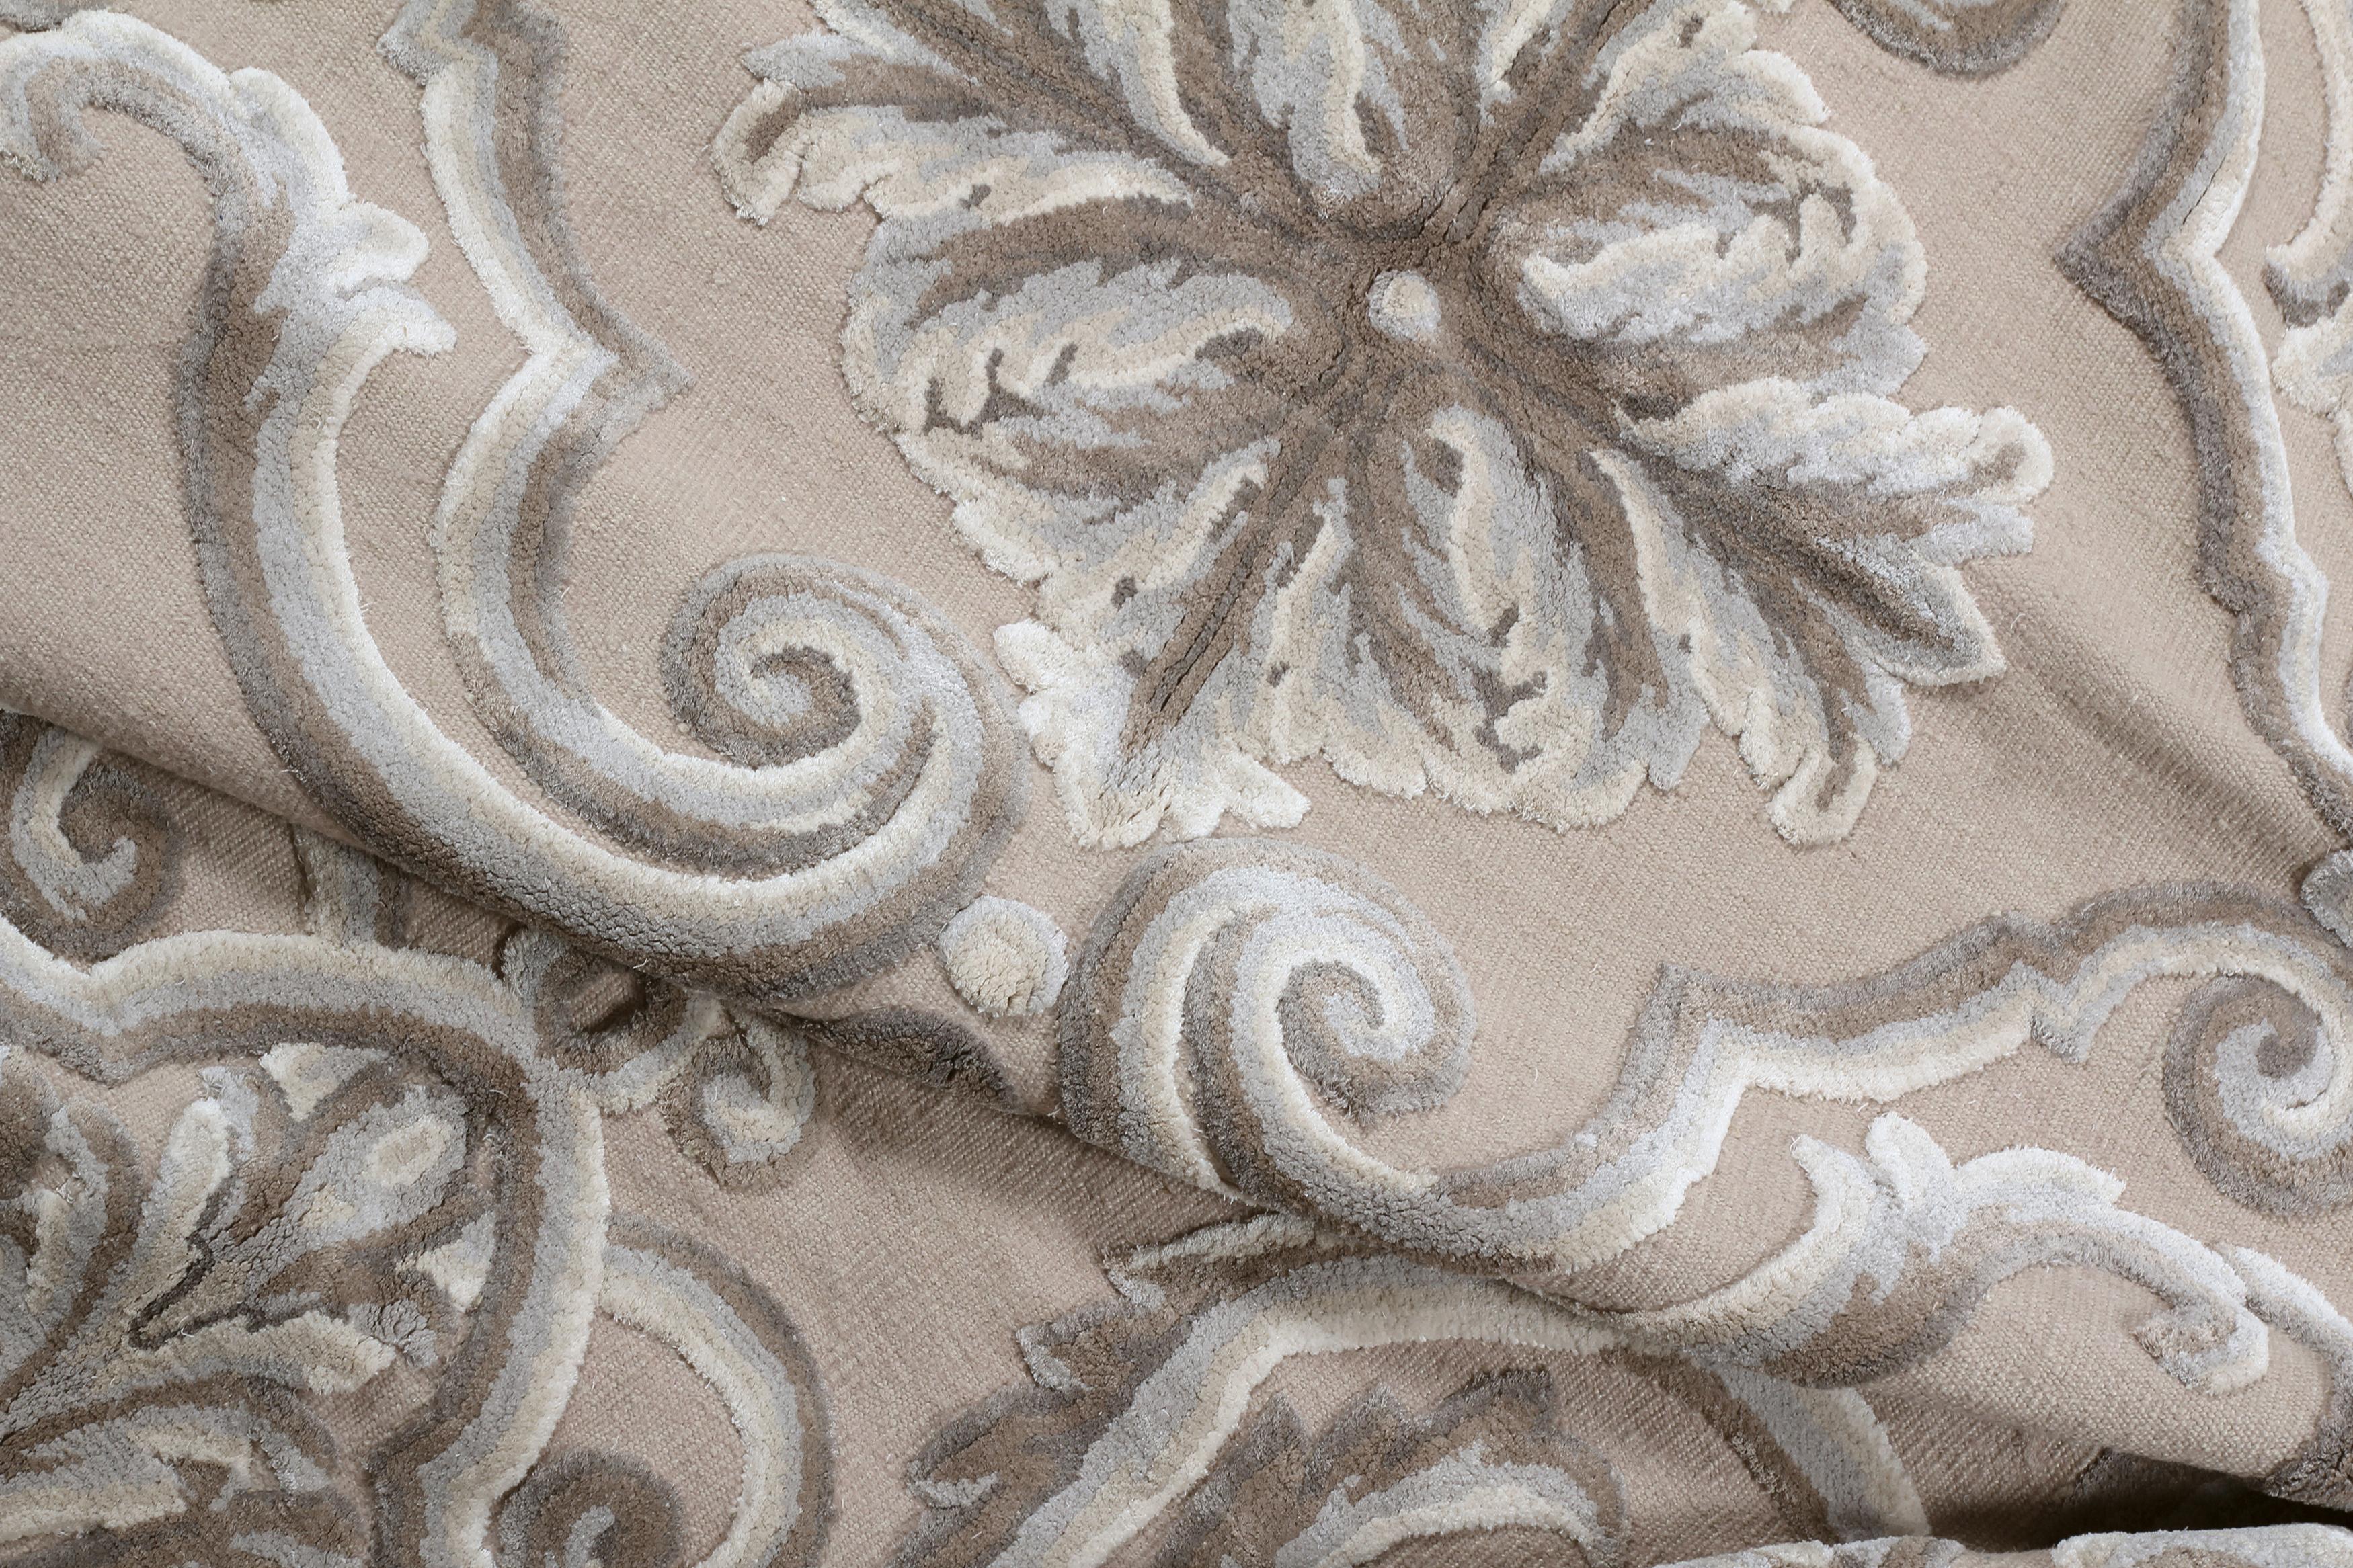 Cardinal Naturel Ficelle
Rug from Renaissance collection of Edition Bougainville
New Aubusson
Linen - Pure silk
Size: 250 x 300cm.

RENAISSANCE
The Age of Enlightenment is the main inspirational thread behind our luxurious rug collection,